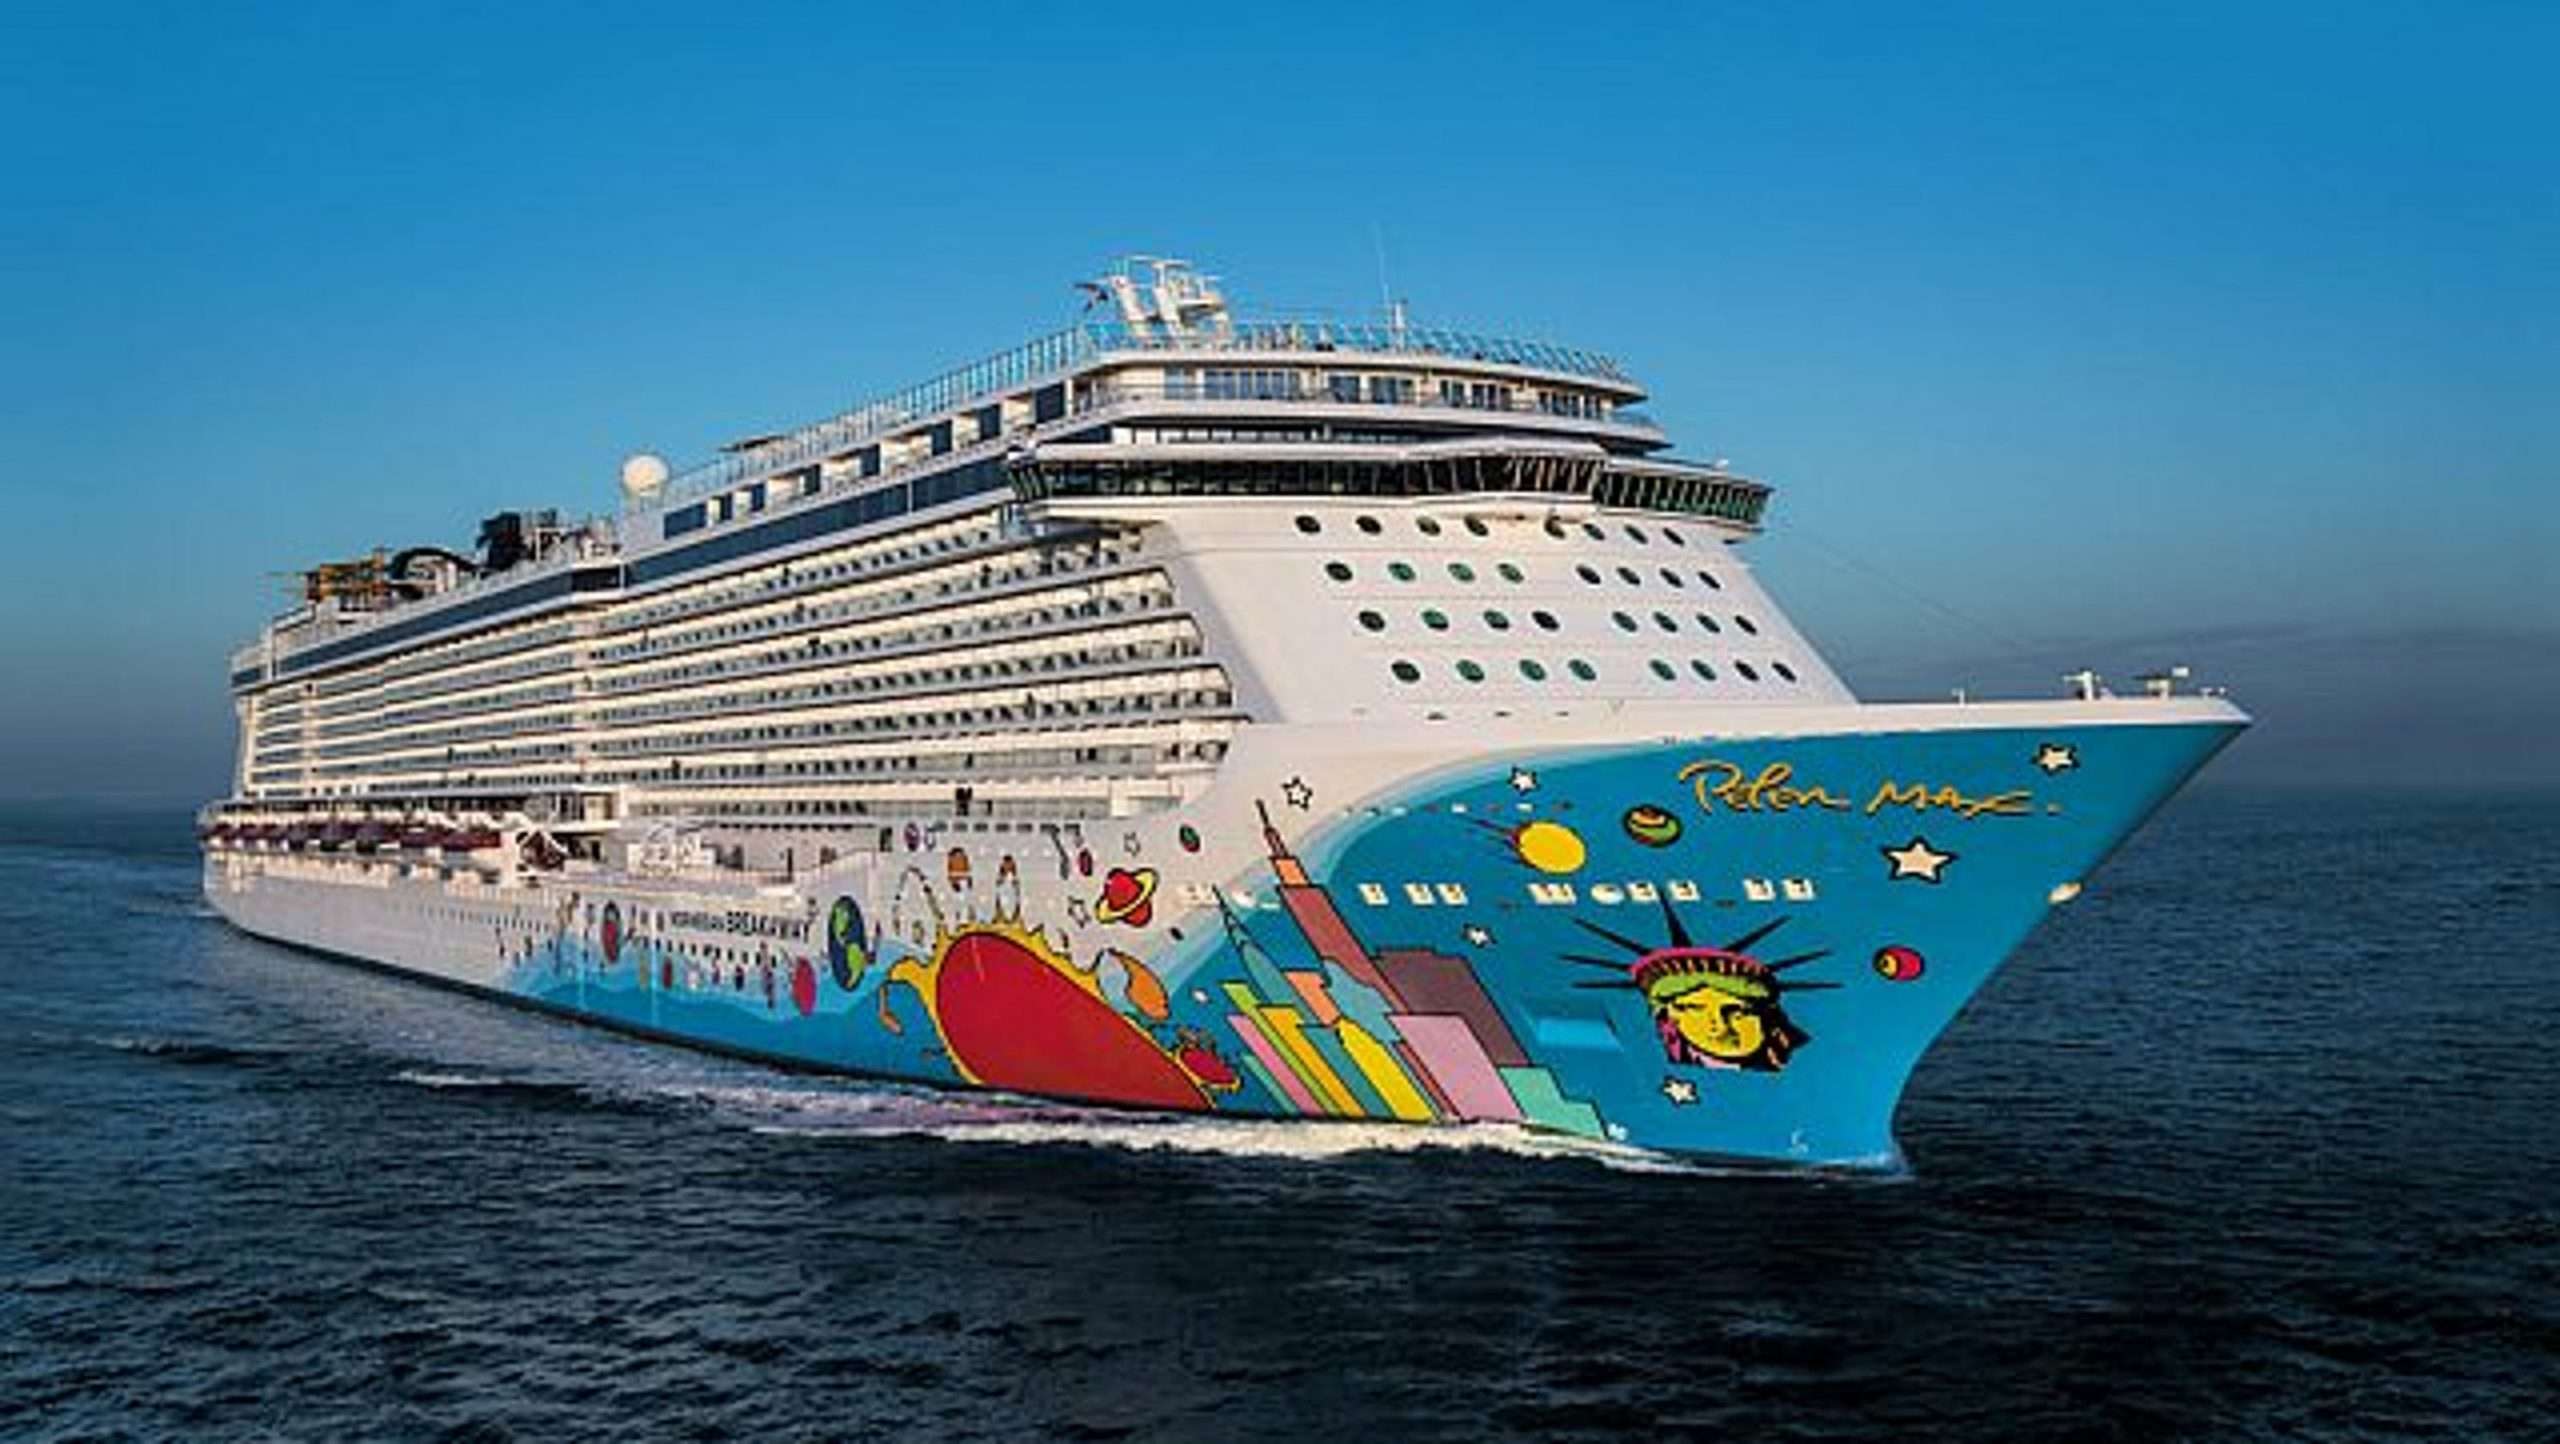 Photo tour: The allure of a Norwegian Cruise Line ship